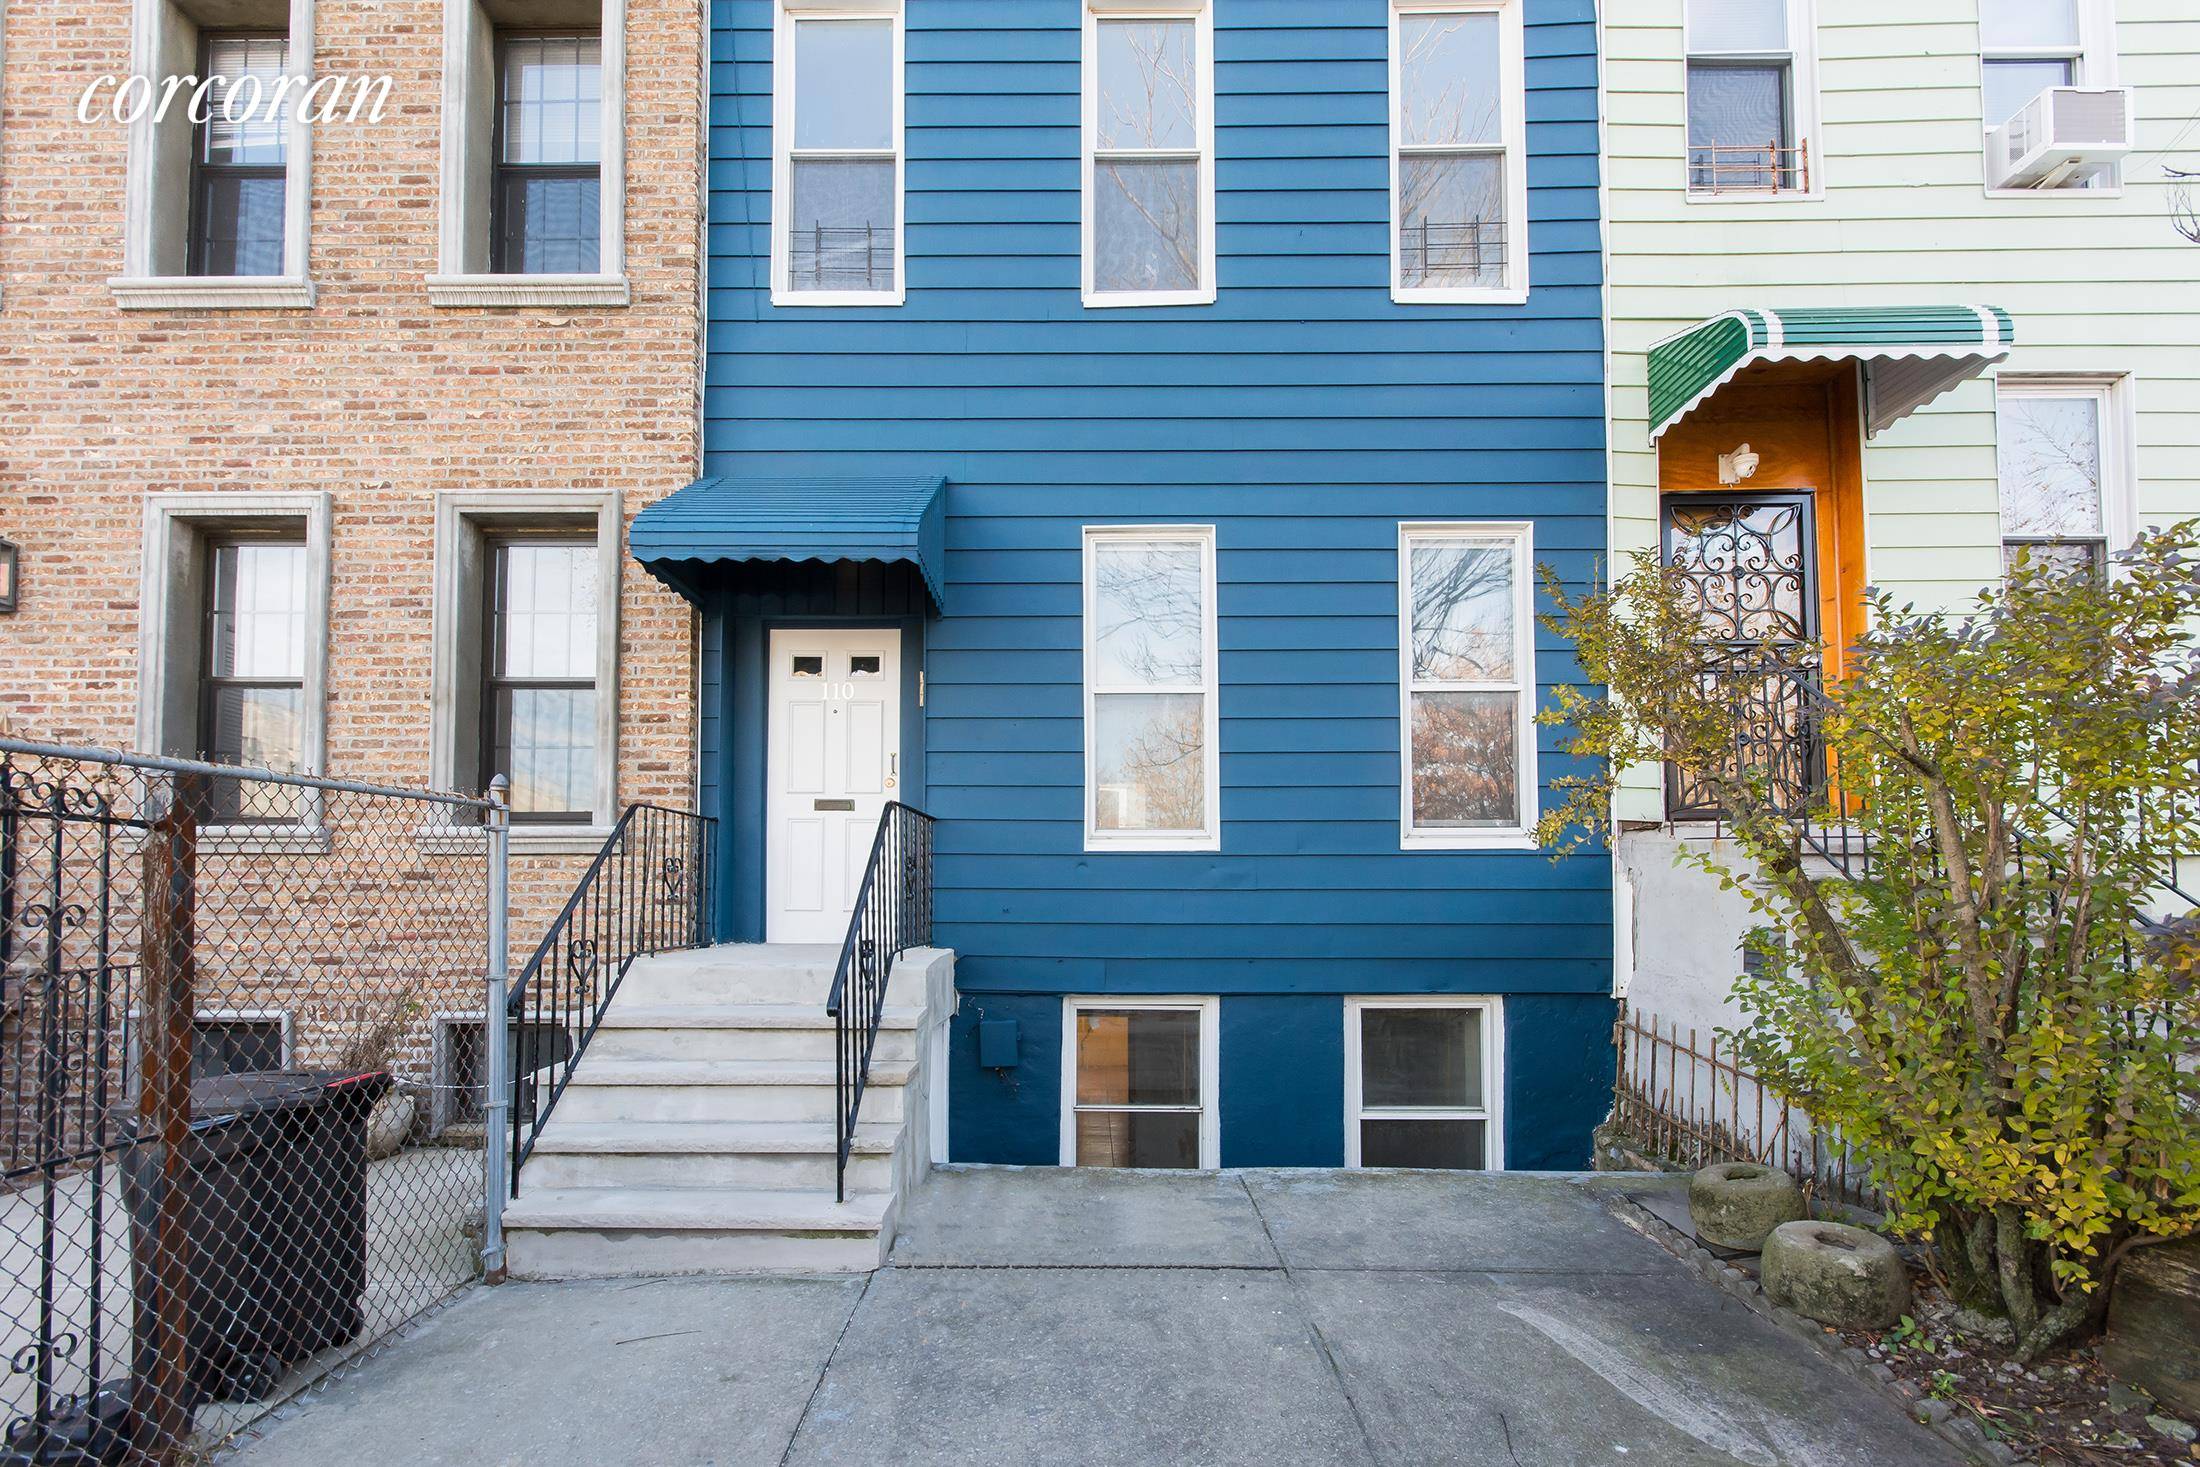 INVESTOR'S DELIGHT IN BUSTLING BUSHWICK Situated across Tiger Park on a tree lined street, this 2 FAM property offers a myriad of design and development options.